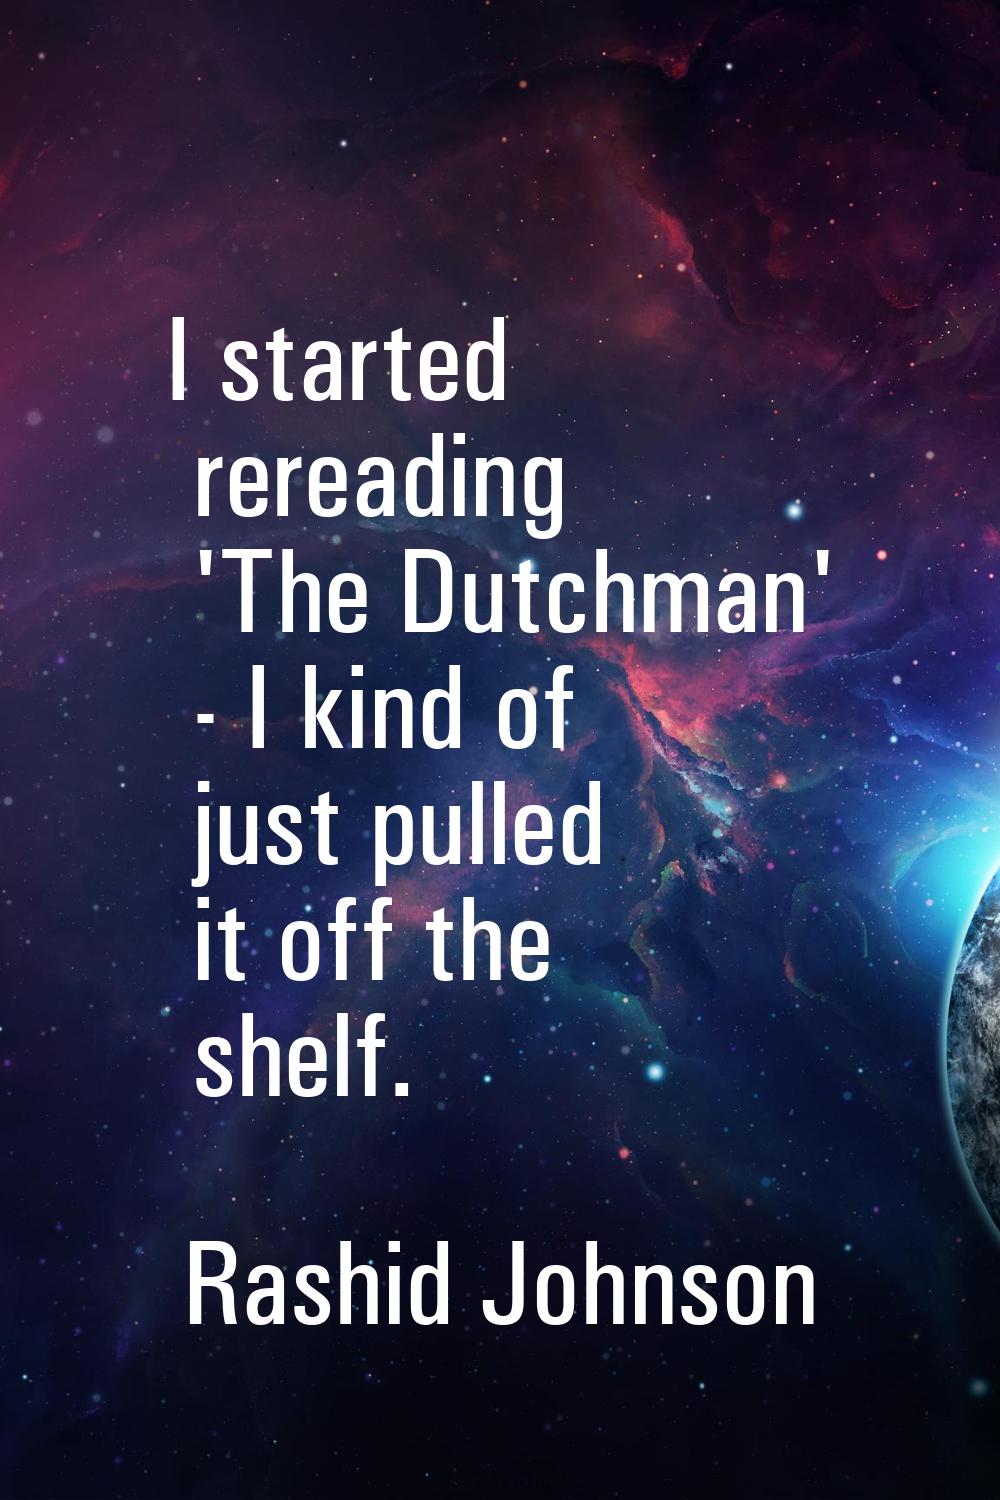 I started rereading 'The Dutchman' - I kind of just pulled it off the shelf.